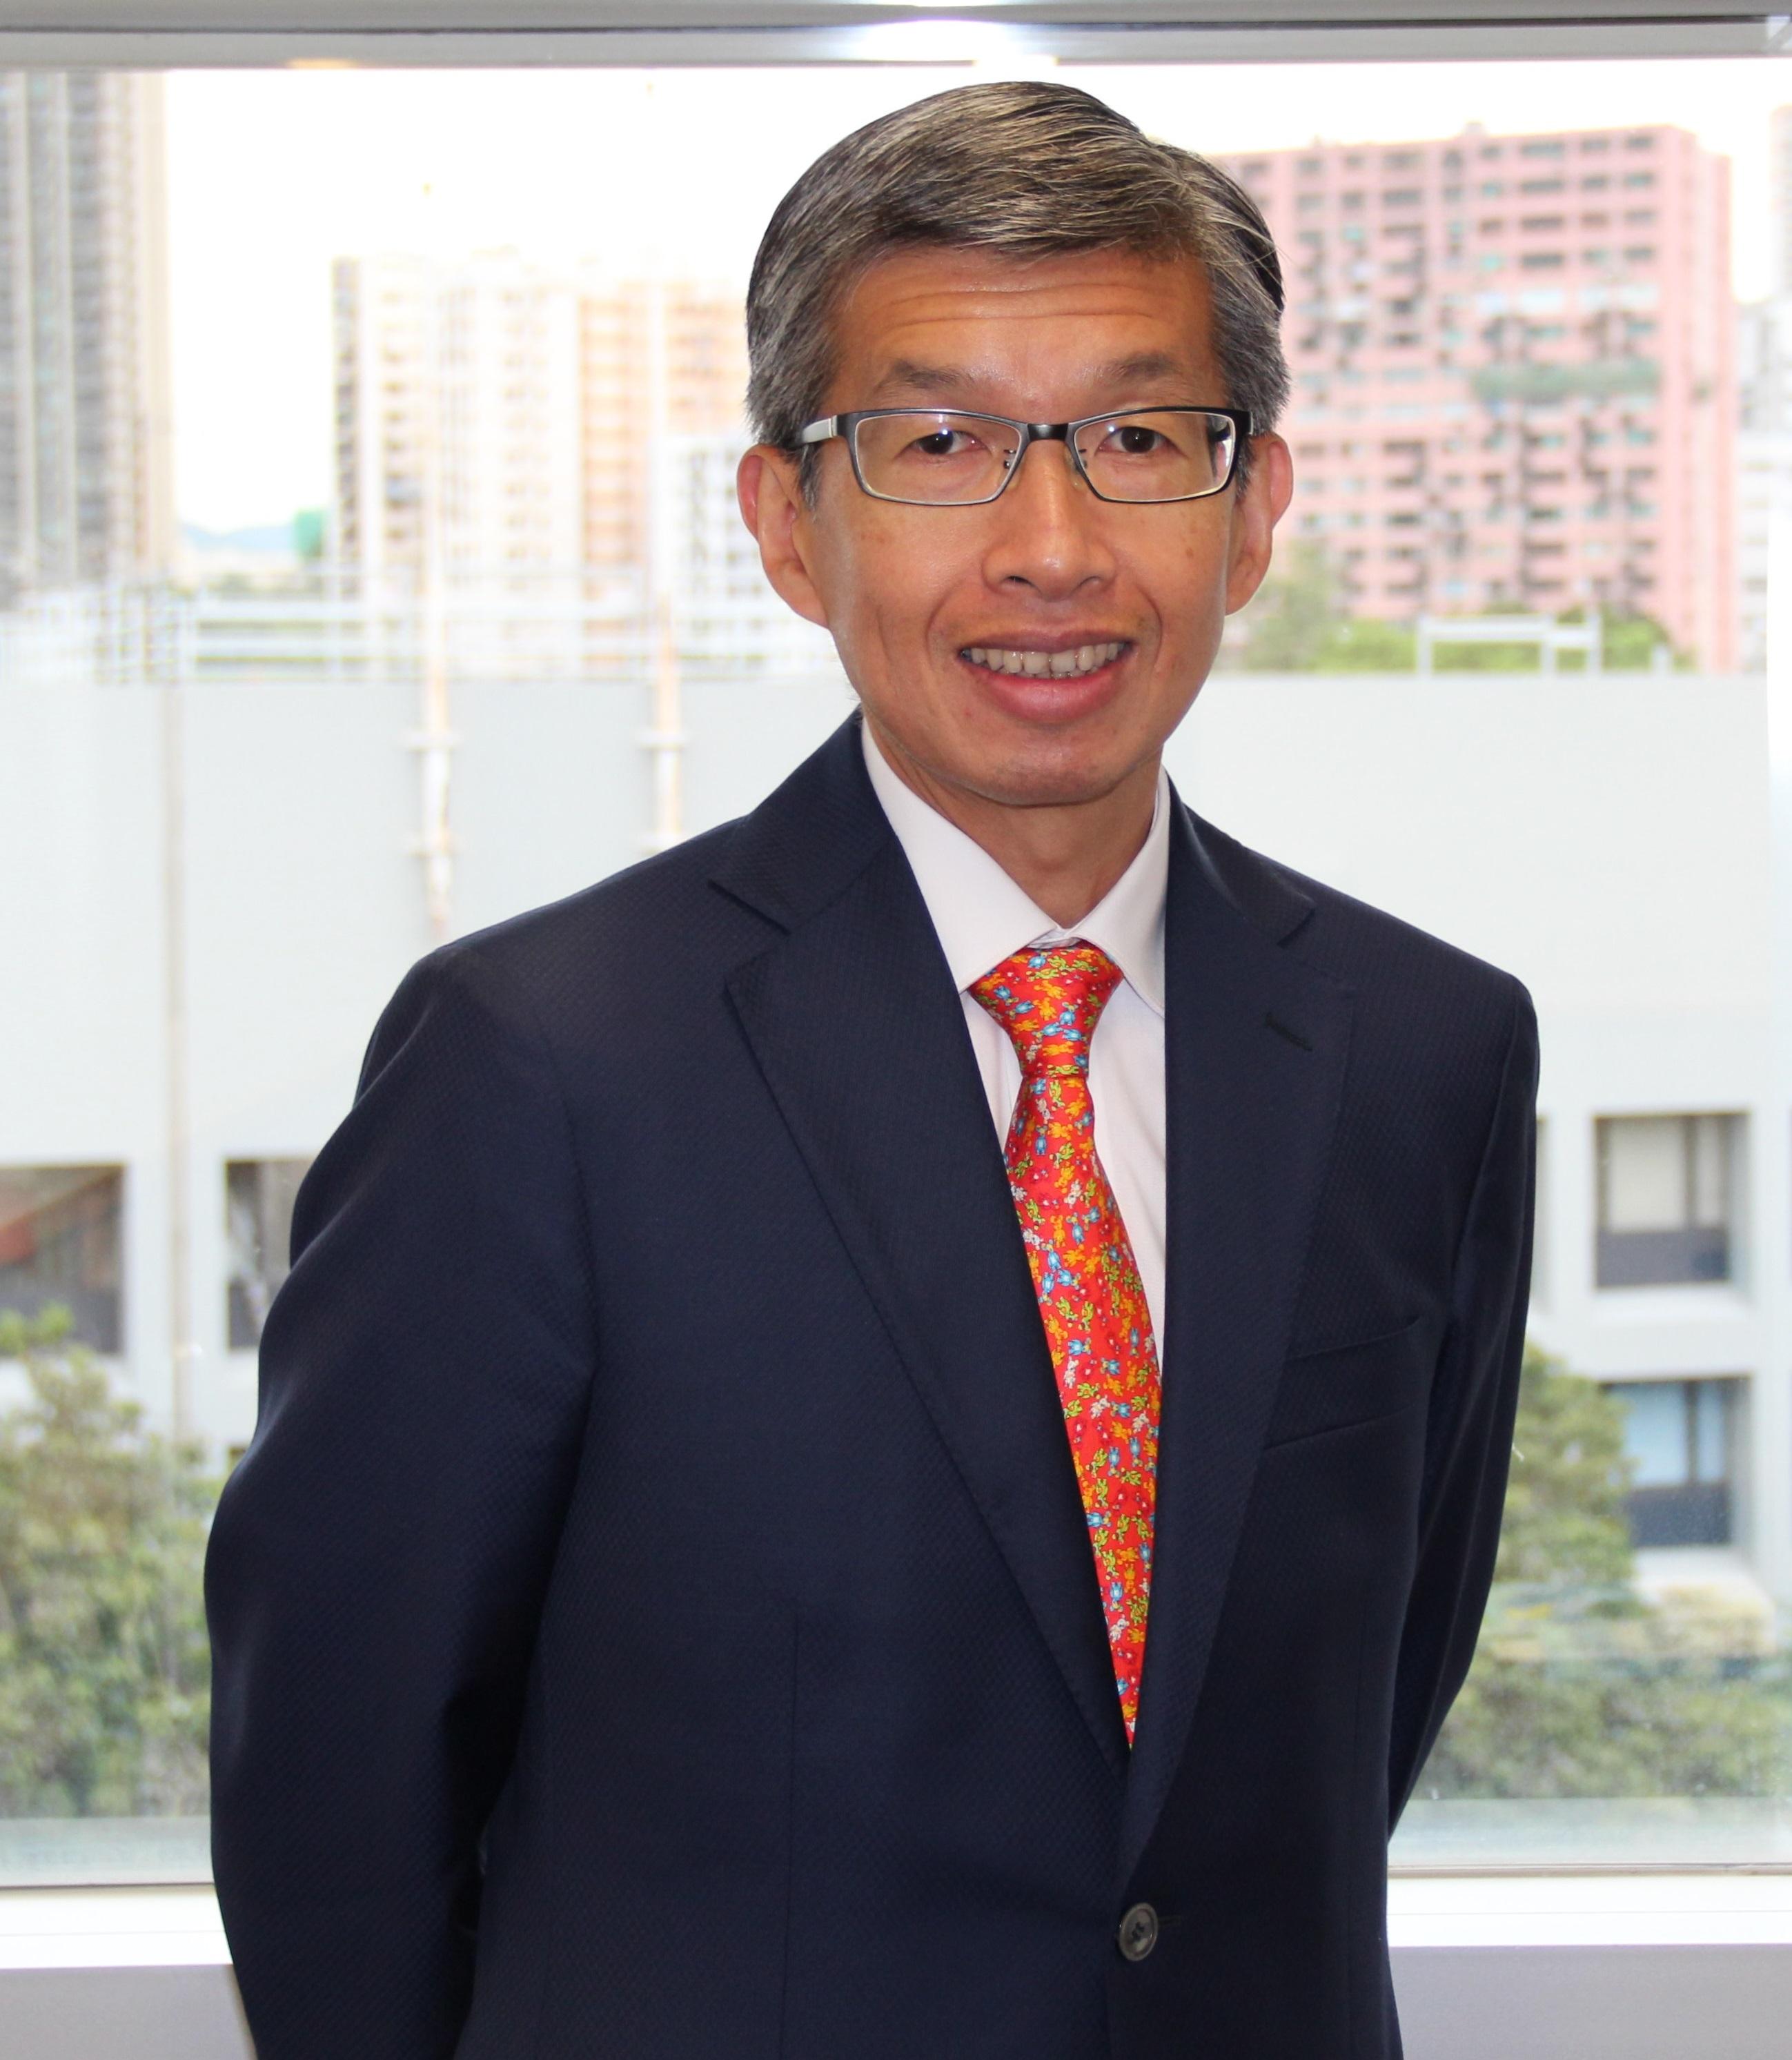 The Hospital Authority announced today (February 25) that it has appointed Dr Simon Tang as the Director of Cluster Services with effect from June 1.